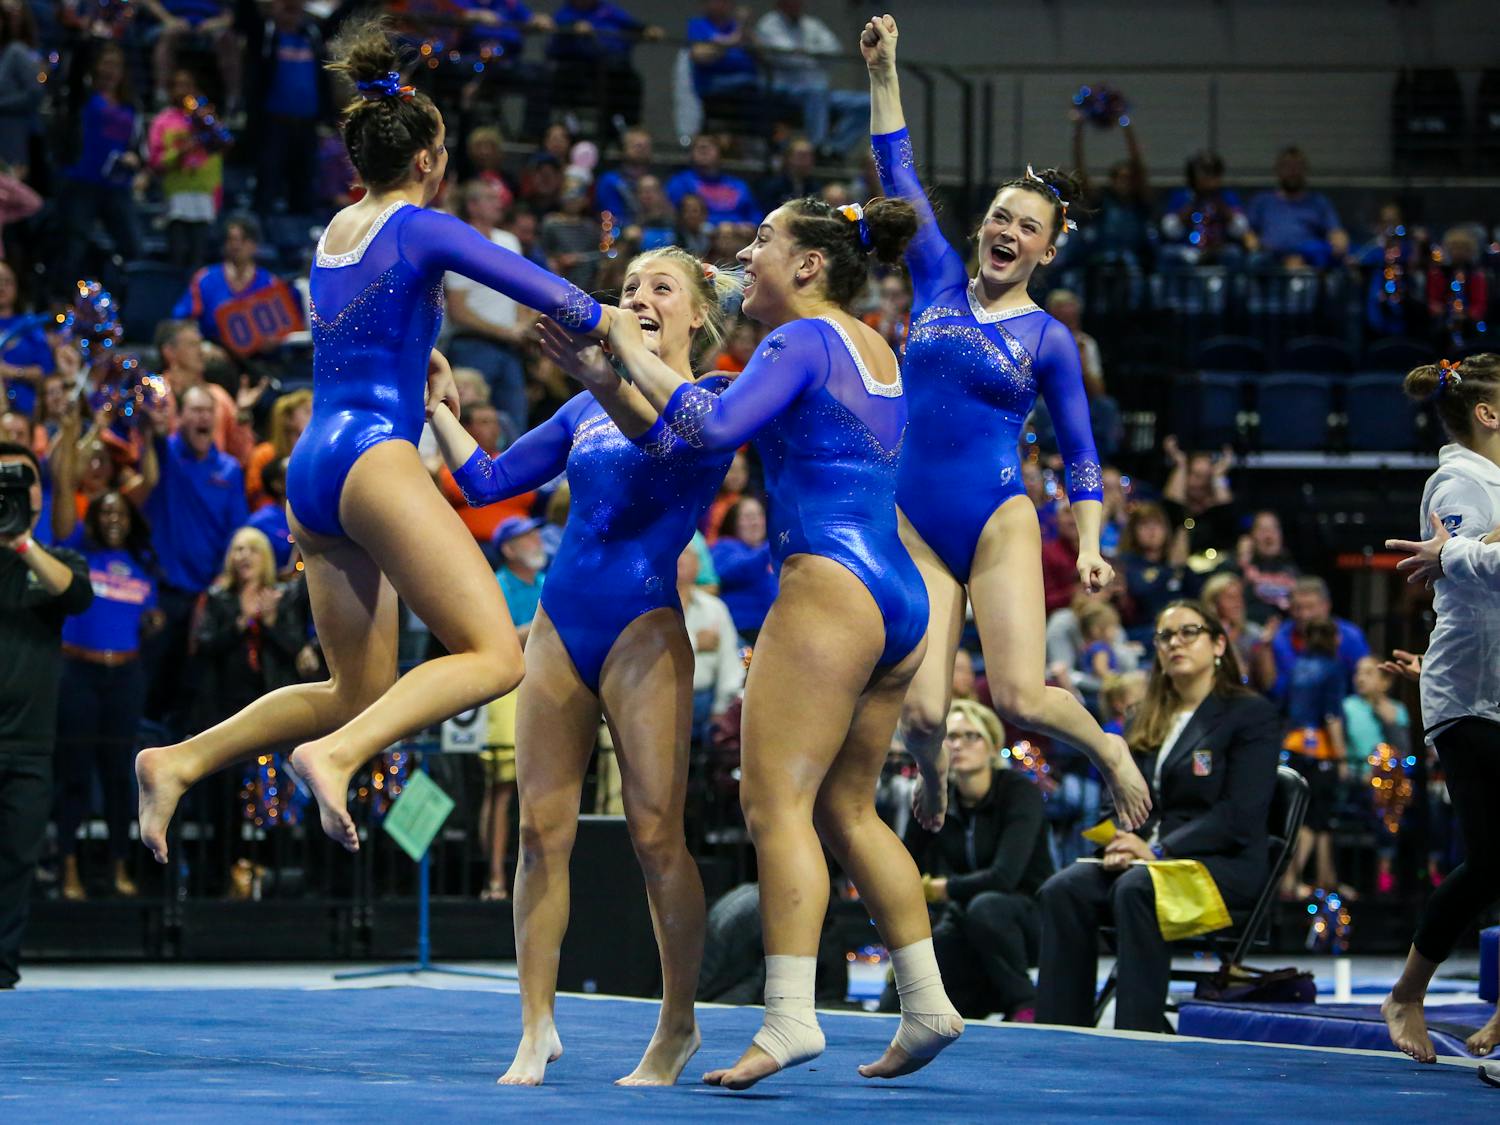 Florida's gymnastics team is heading to Pennsylvania for the regional round of the NCAA Championships.